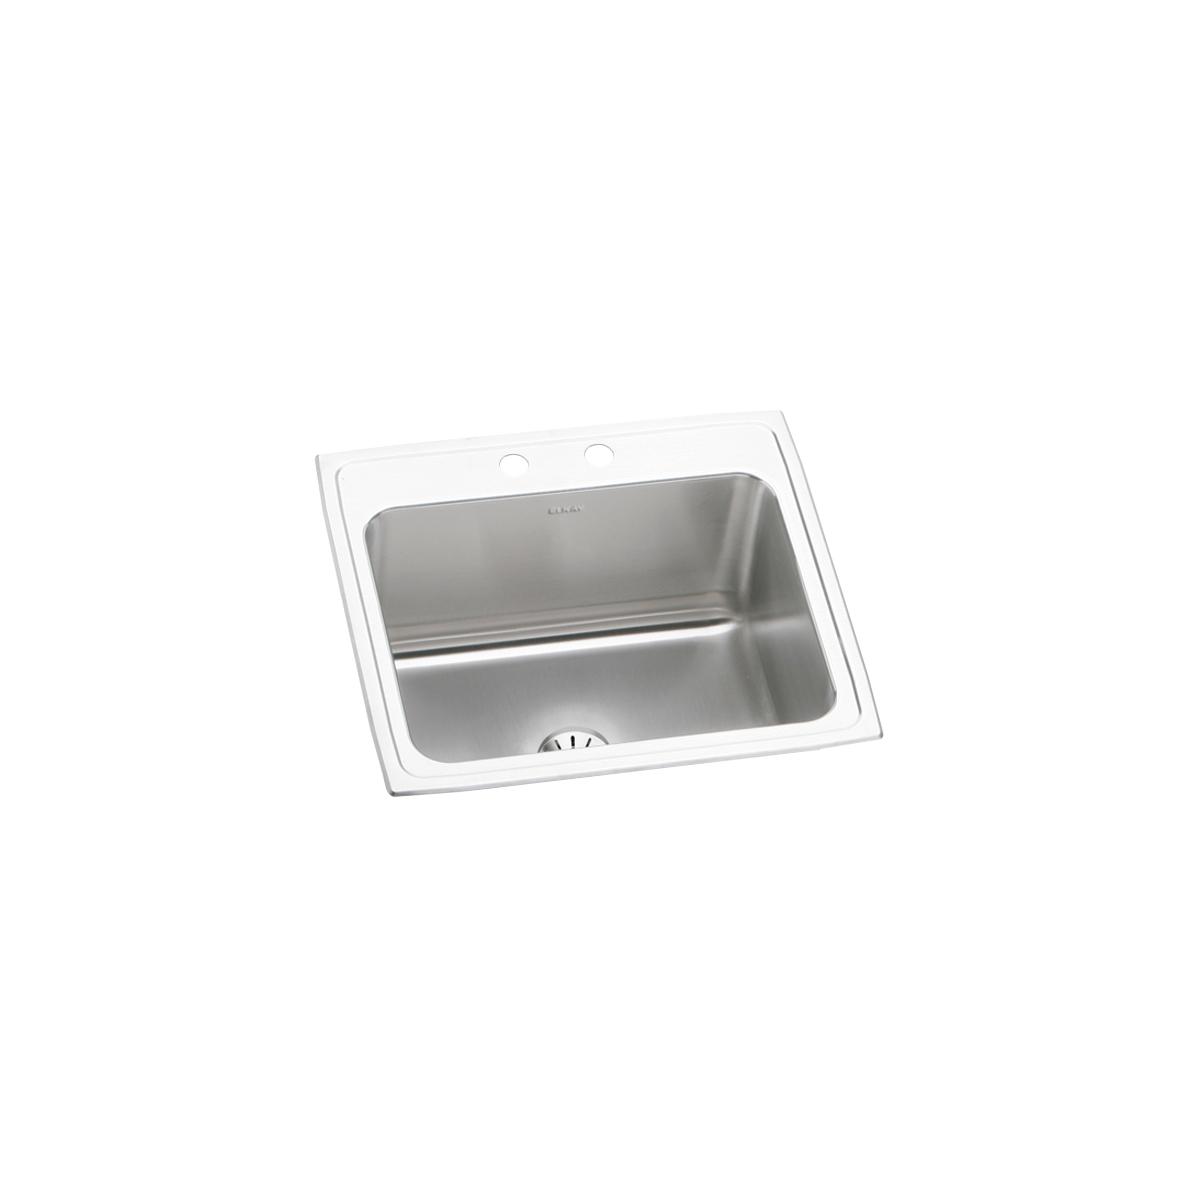 Elkay Lustertone Classic 25" x 22" x 10-3/8" Single Bowl Drop-in Sink with Perfect Drain